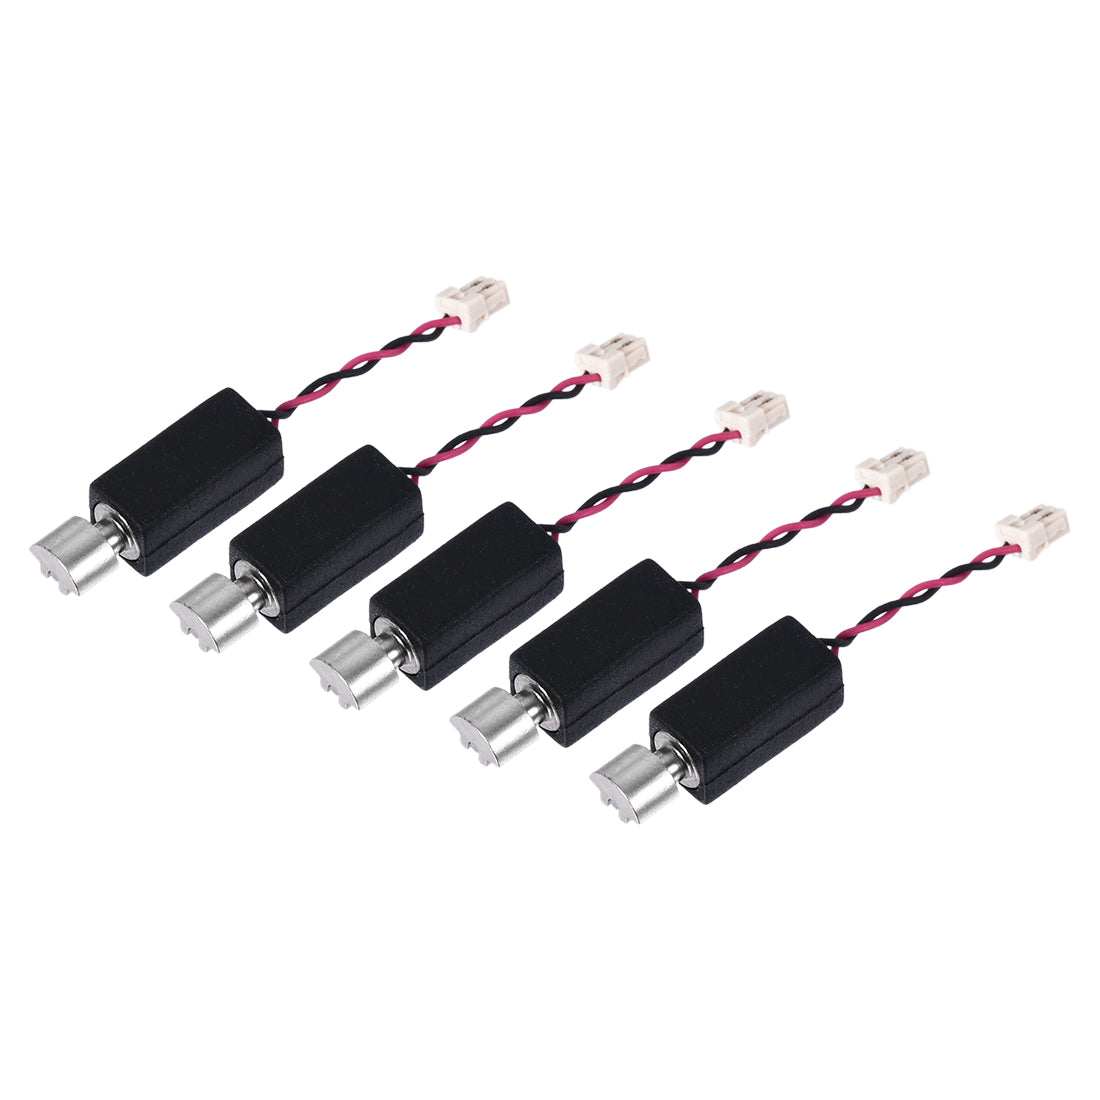 uxcell Uxcell Micro Mini Hollow Cup Vibration Motors DC 3V-4.2V 65mA Electric Motor 12.2x3.2mm 12mm Cable 5Pcs